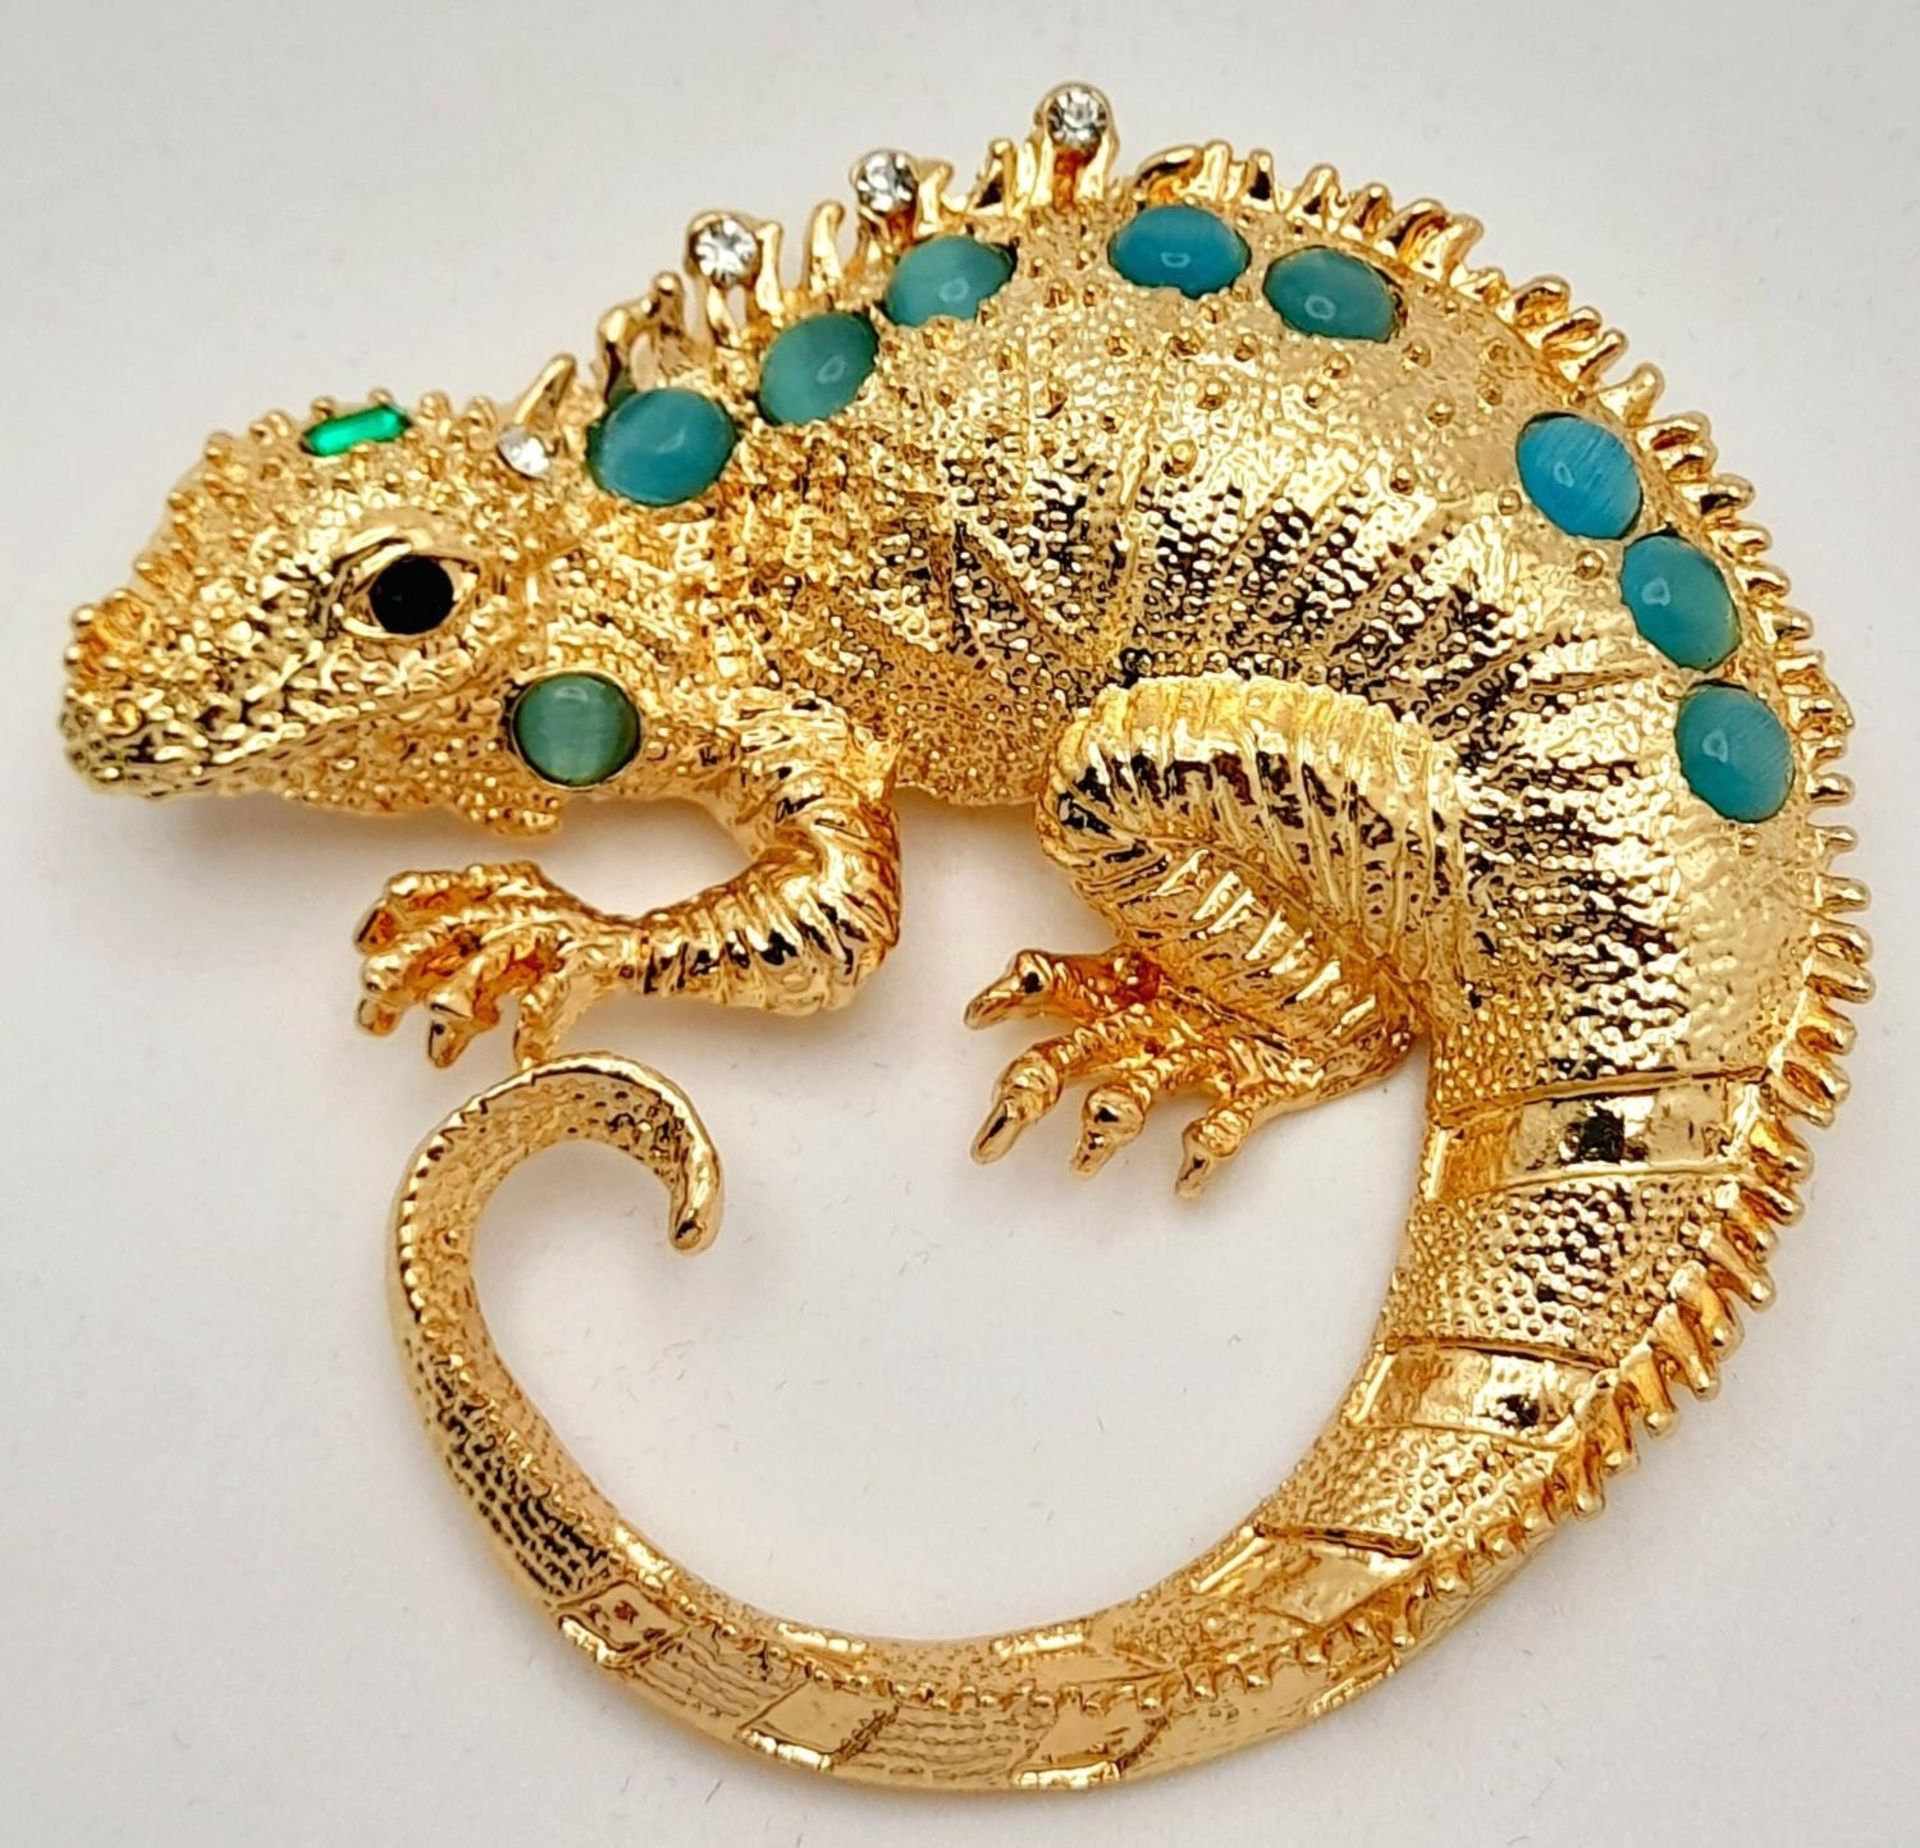 A very glamorous, well proportioned, gold plated and gem studded chameleon brooch, in a presentation